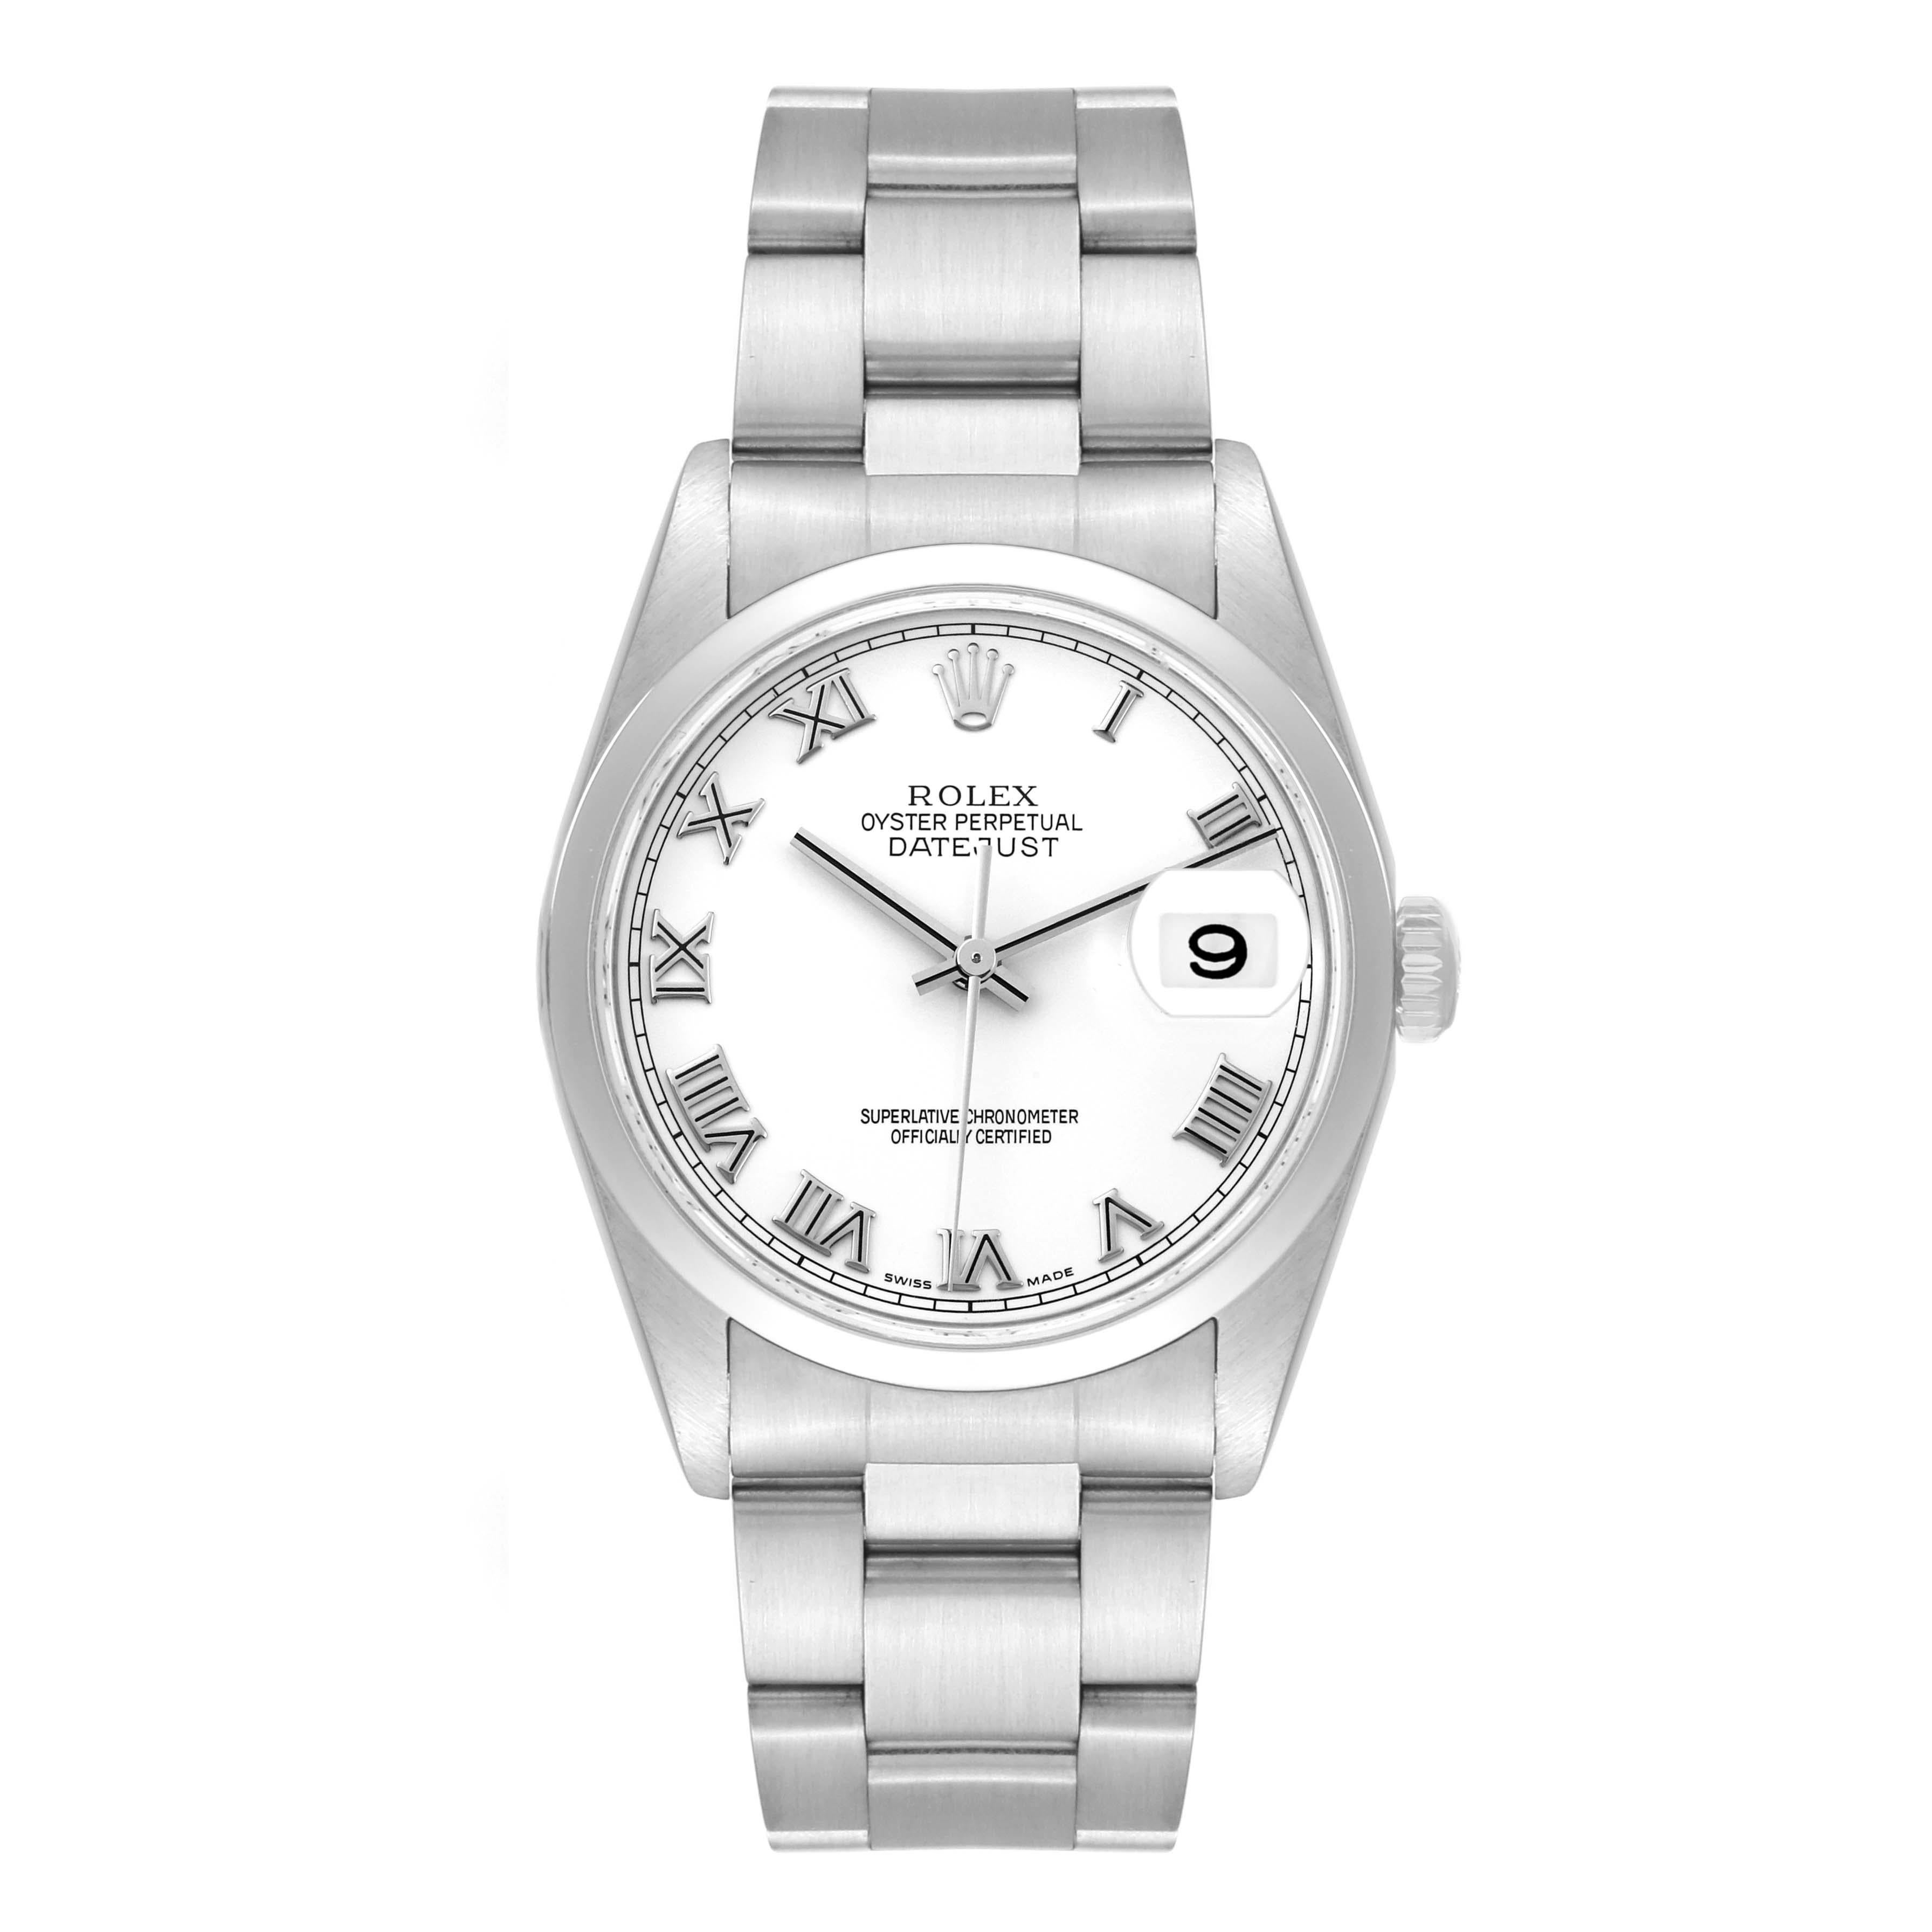 Rolex Datejust 36 White Roman Dial Steel Mens Watch 16200. Officially certified chronometer automatic self-winding movement. Stainless steel oyster case 36 mm in diameter. Rolex logo on the crown. Stainless steel smooth bezel. Scratch resistant